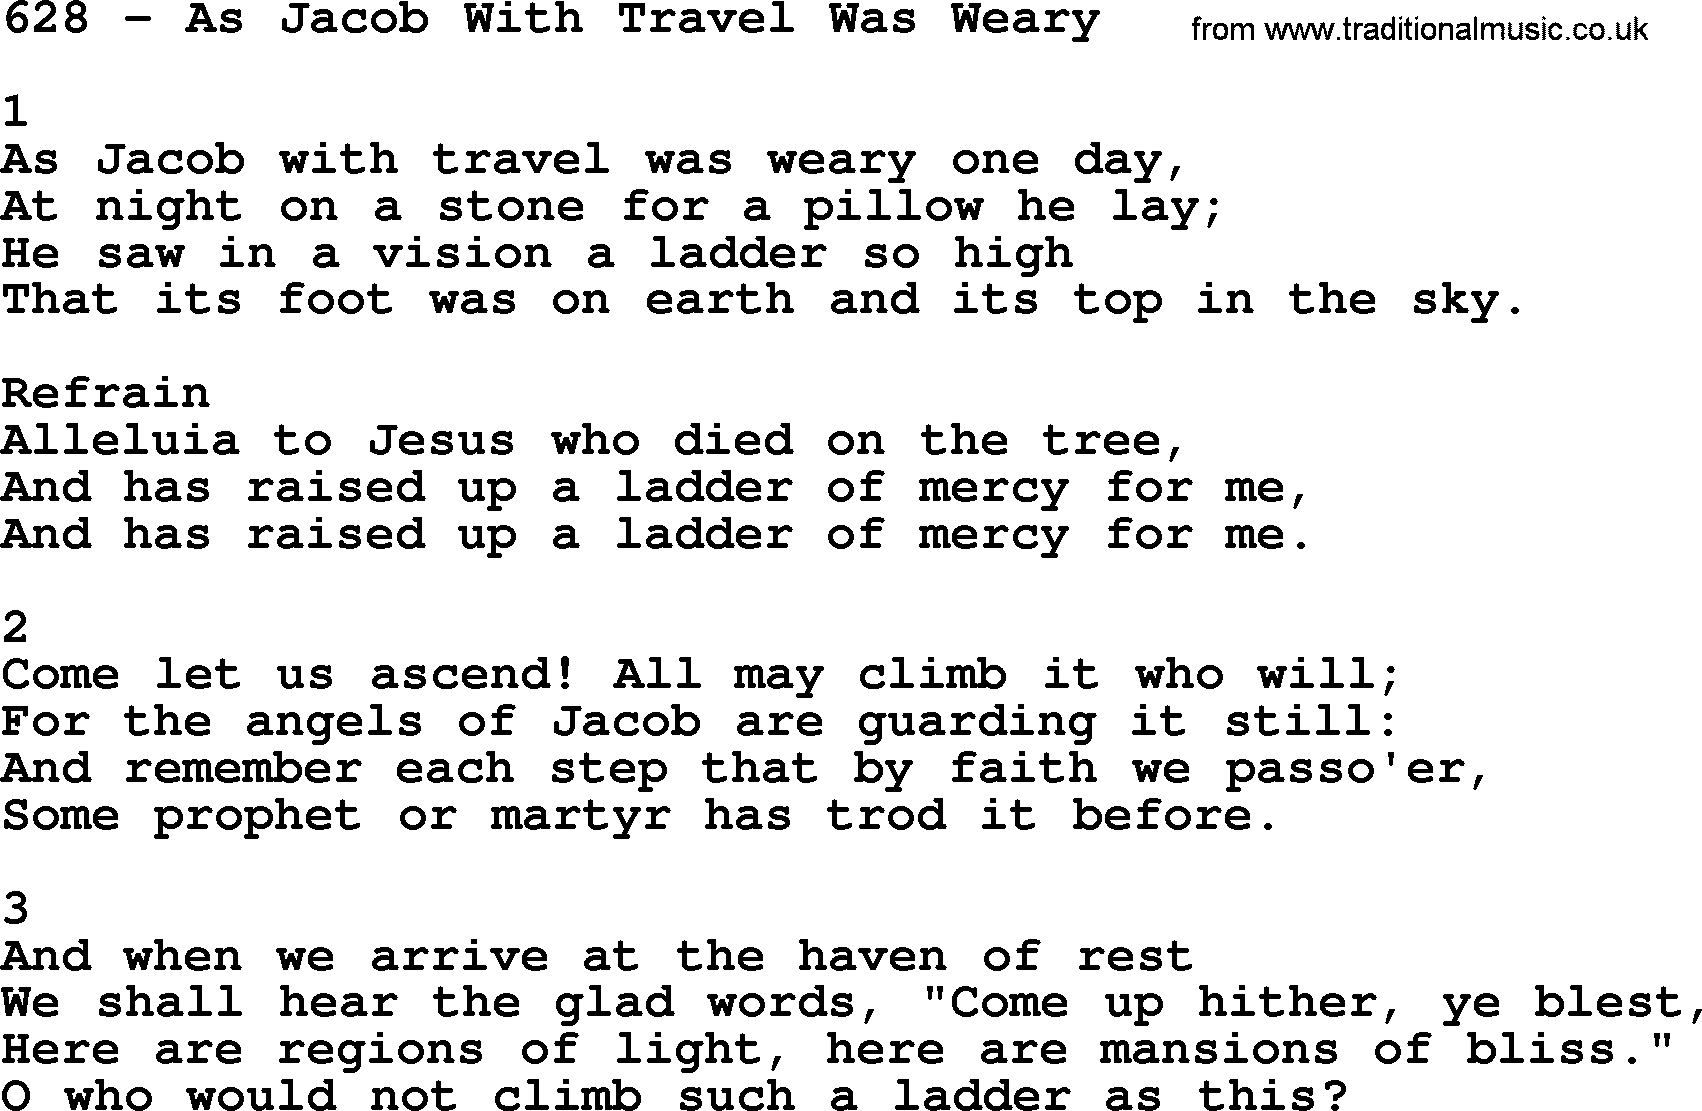 Complete Adventis Hymnal, title: 628-As Jacob With Travel Was Weary, with lyrics, midi, mp3, powerpoints(PPT) and PDF,